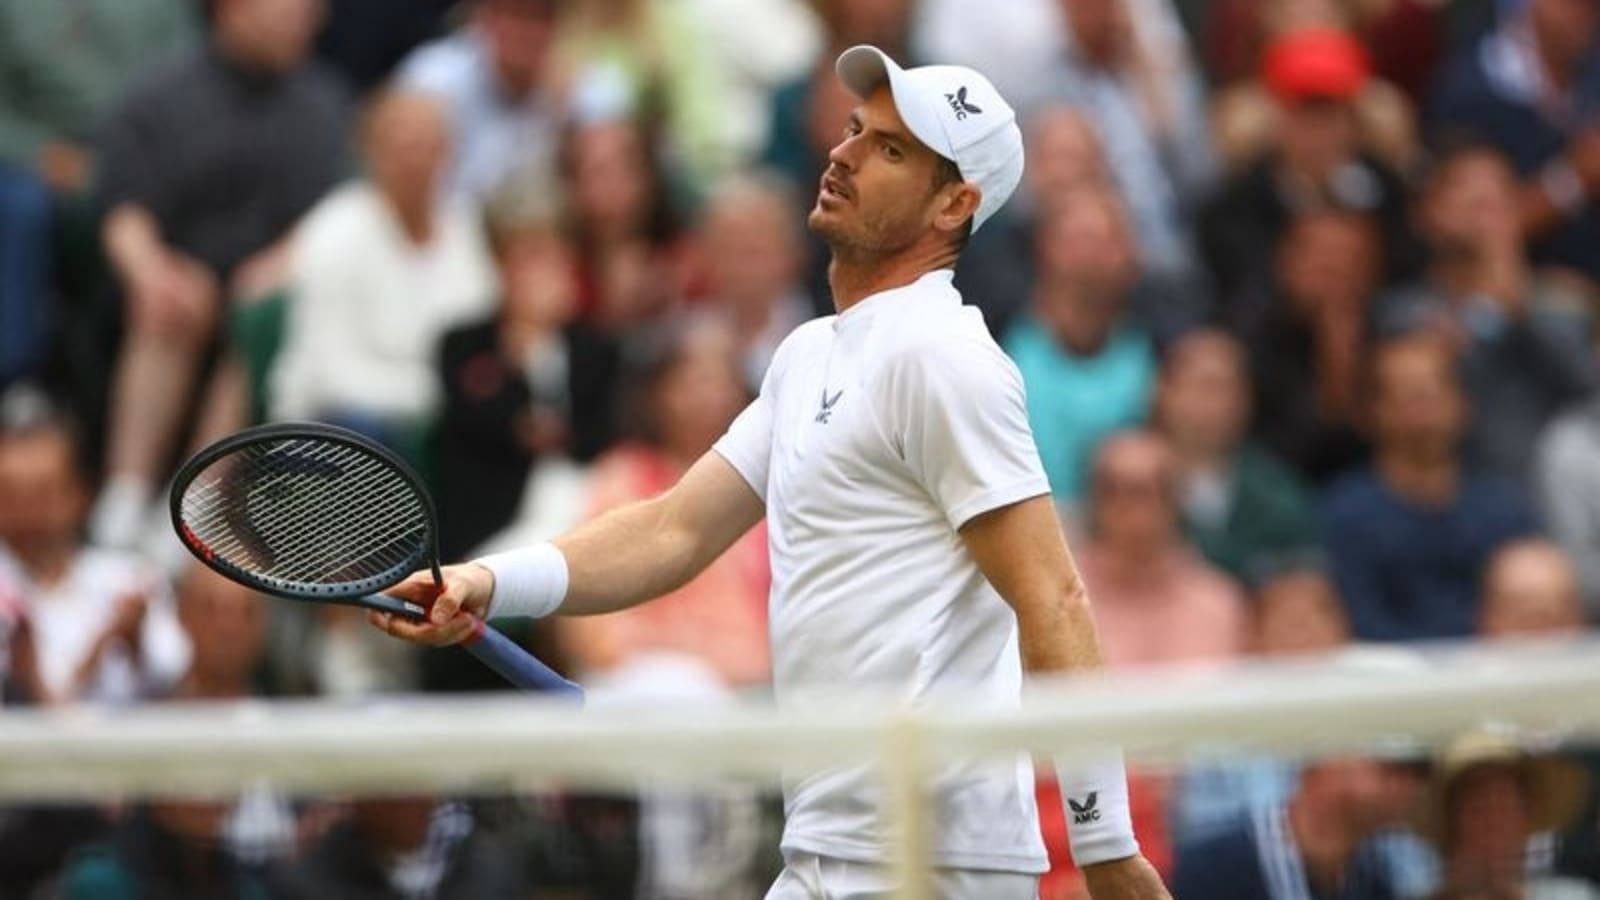 Two-time Wimbledon champ Andy Murray loses to Isner in 2nd round